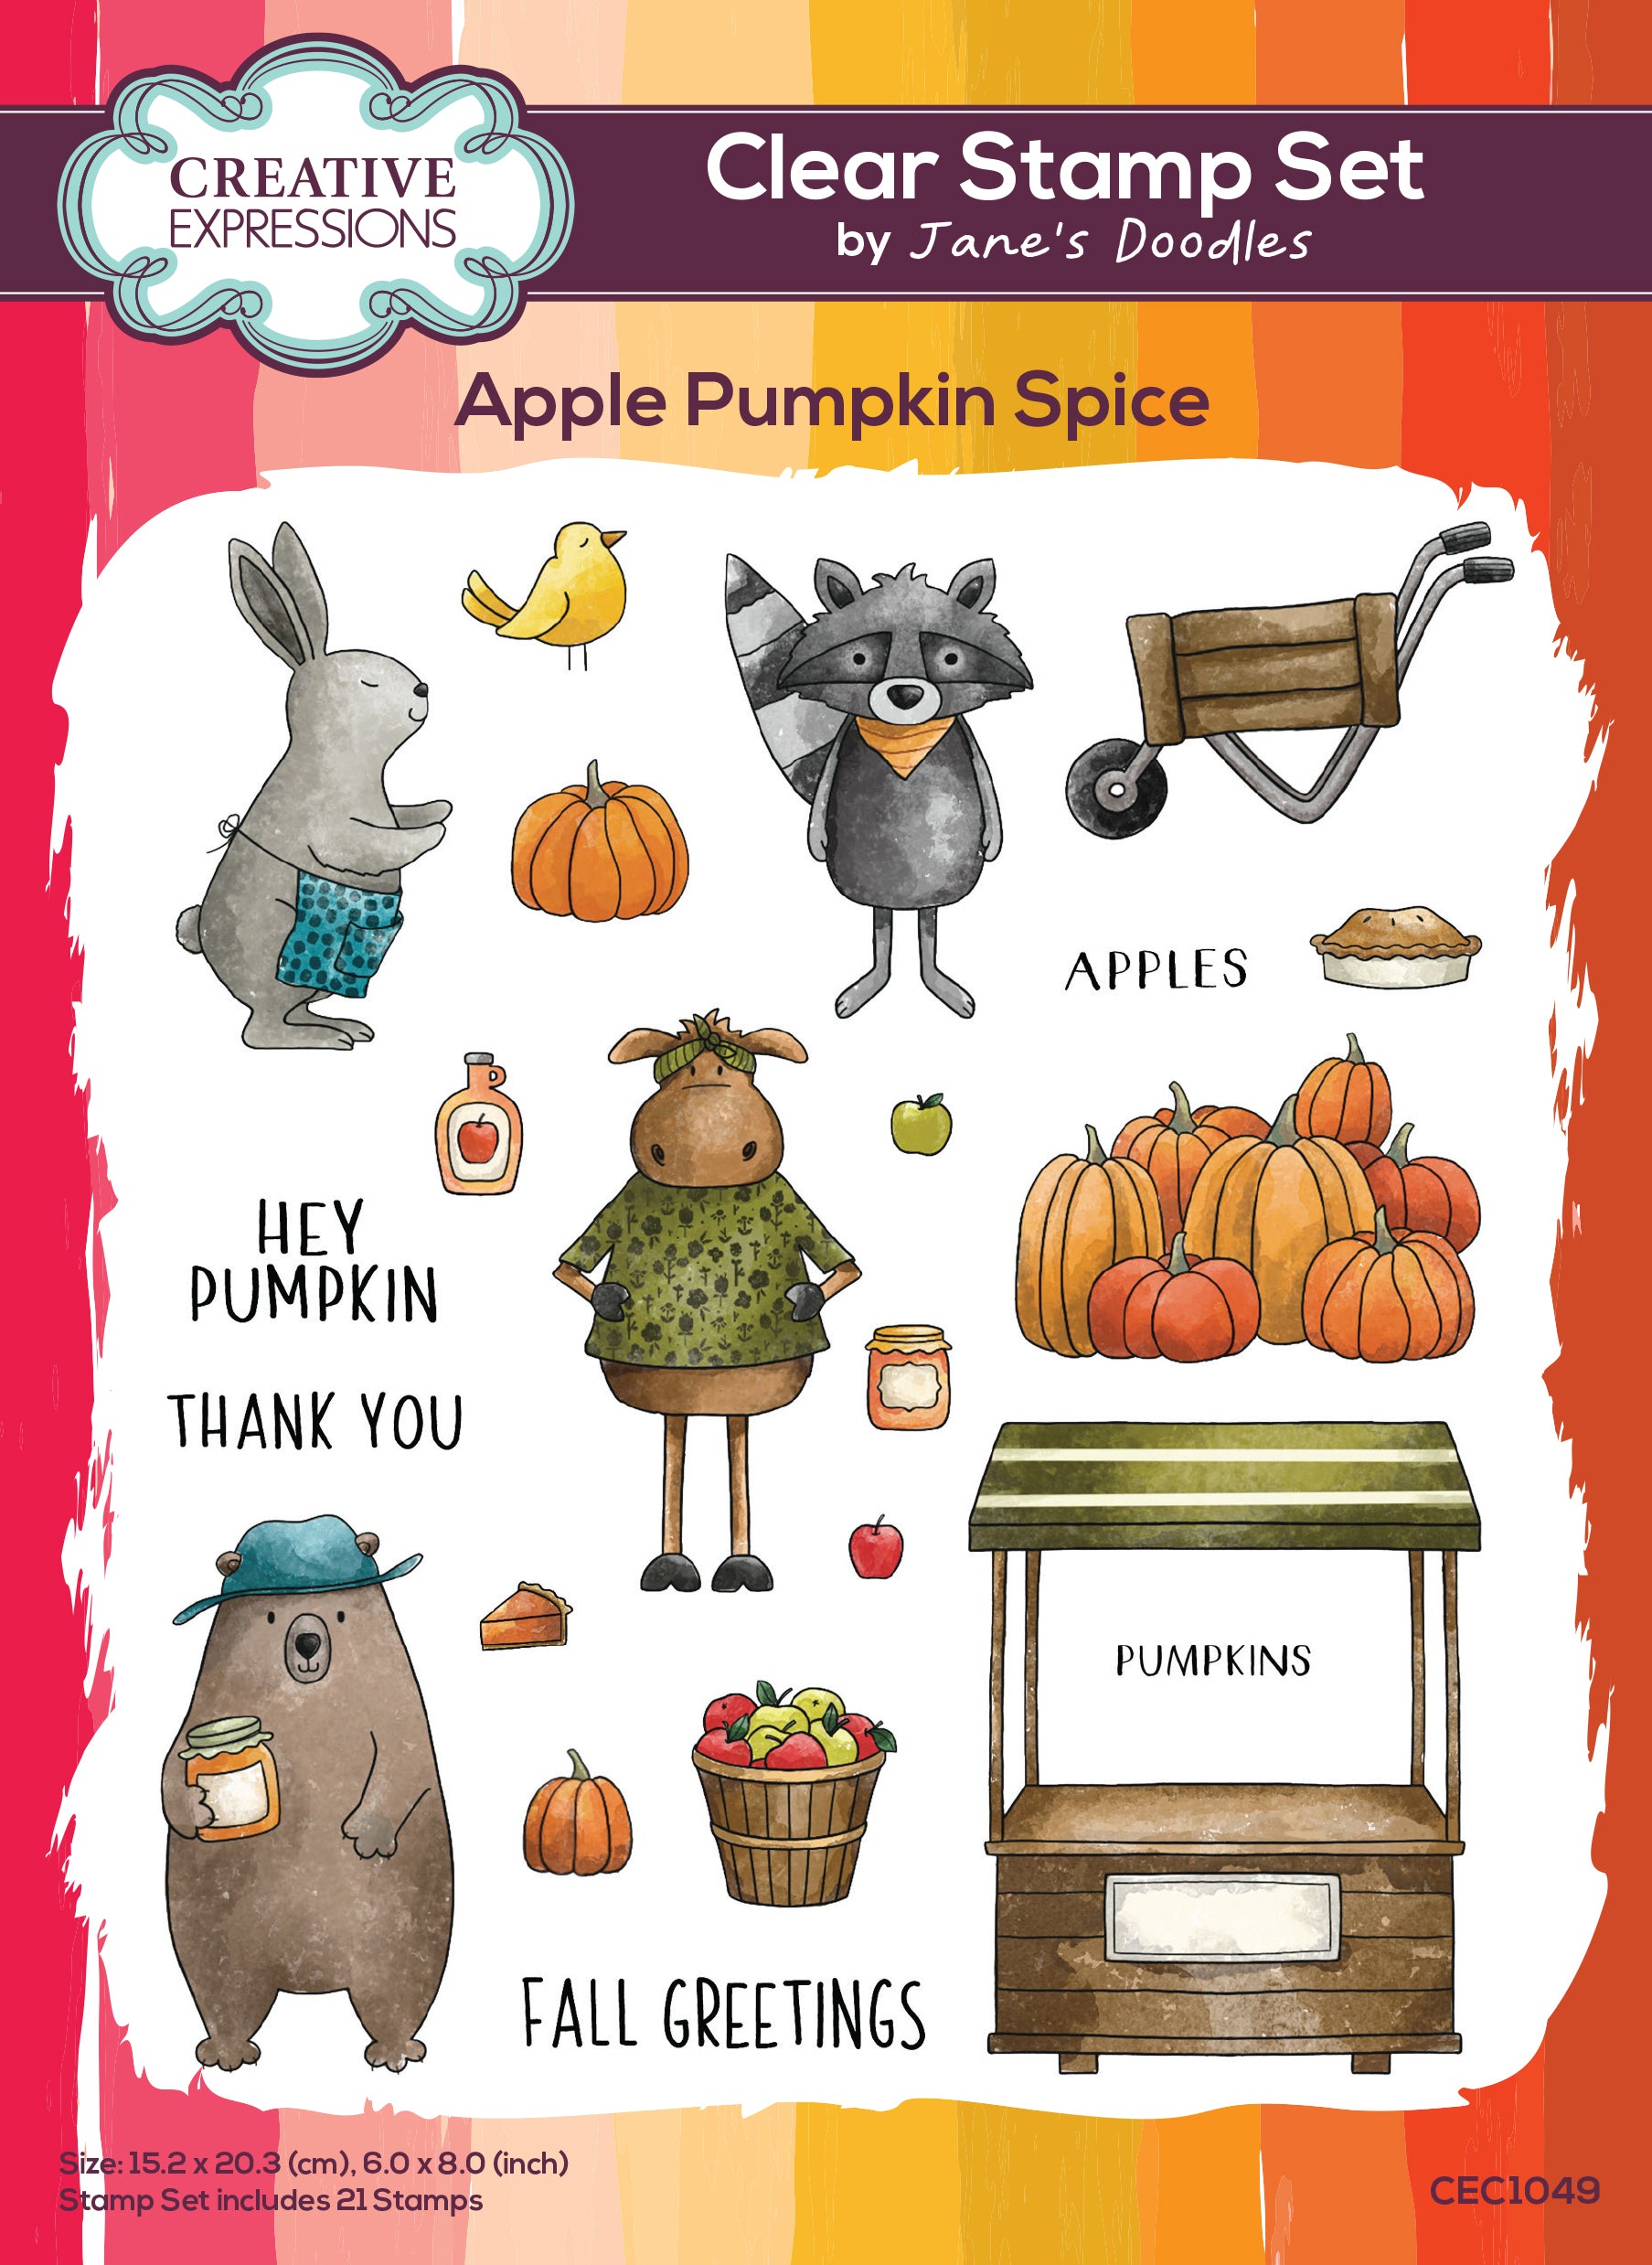 Uppercase Pumpkin Spice Letter Stamp Set 3mm, By Stamp Yours